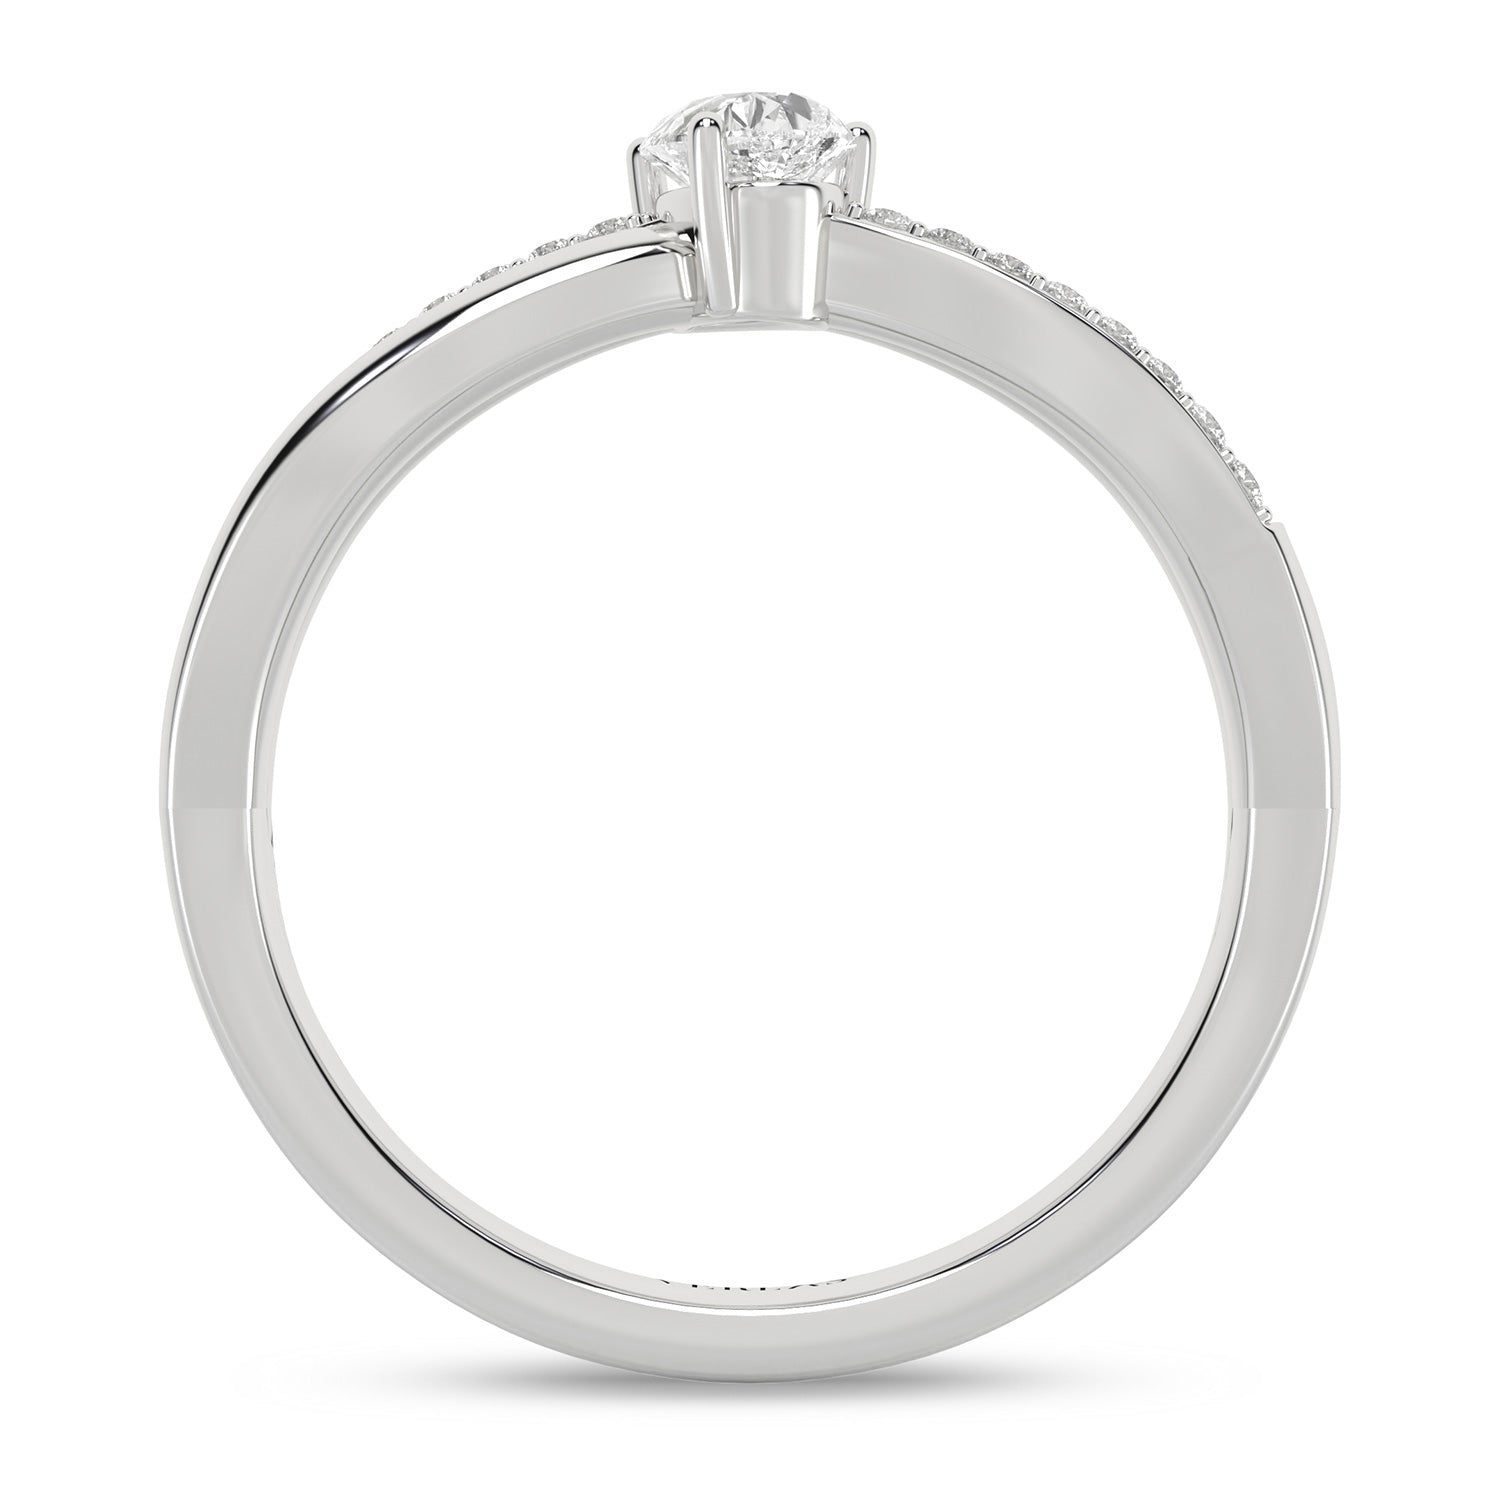 Essential 4-Pronged Round Ring_Product Angle_1/5 Ct. - 3